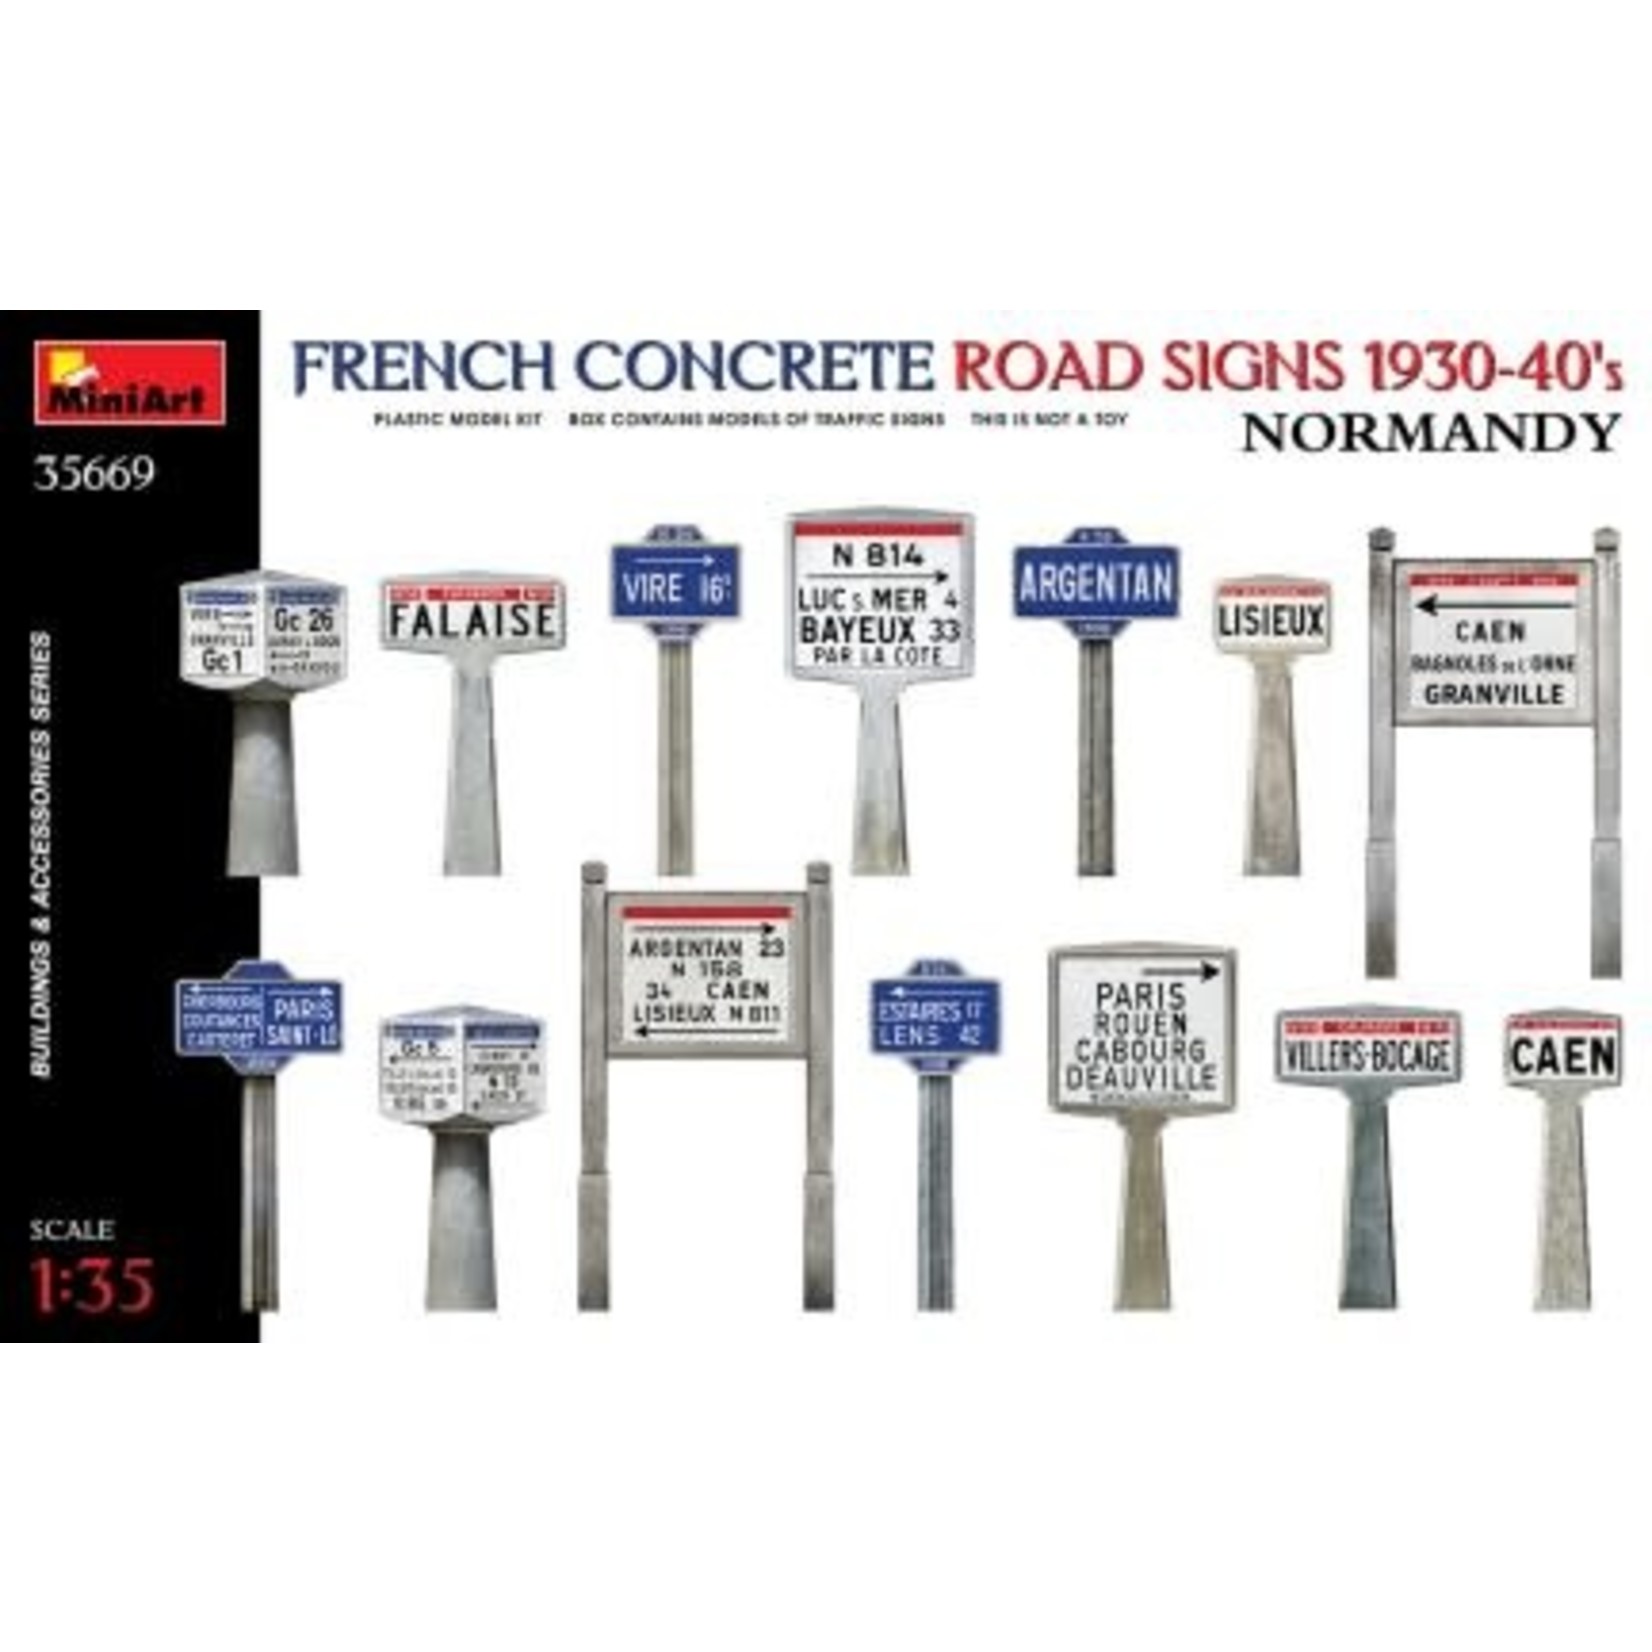 MiniArt 1/35 French Concrete Road Signs Normandy 1930-40s